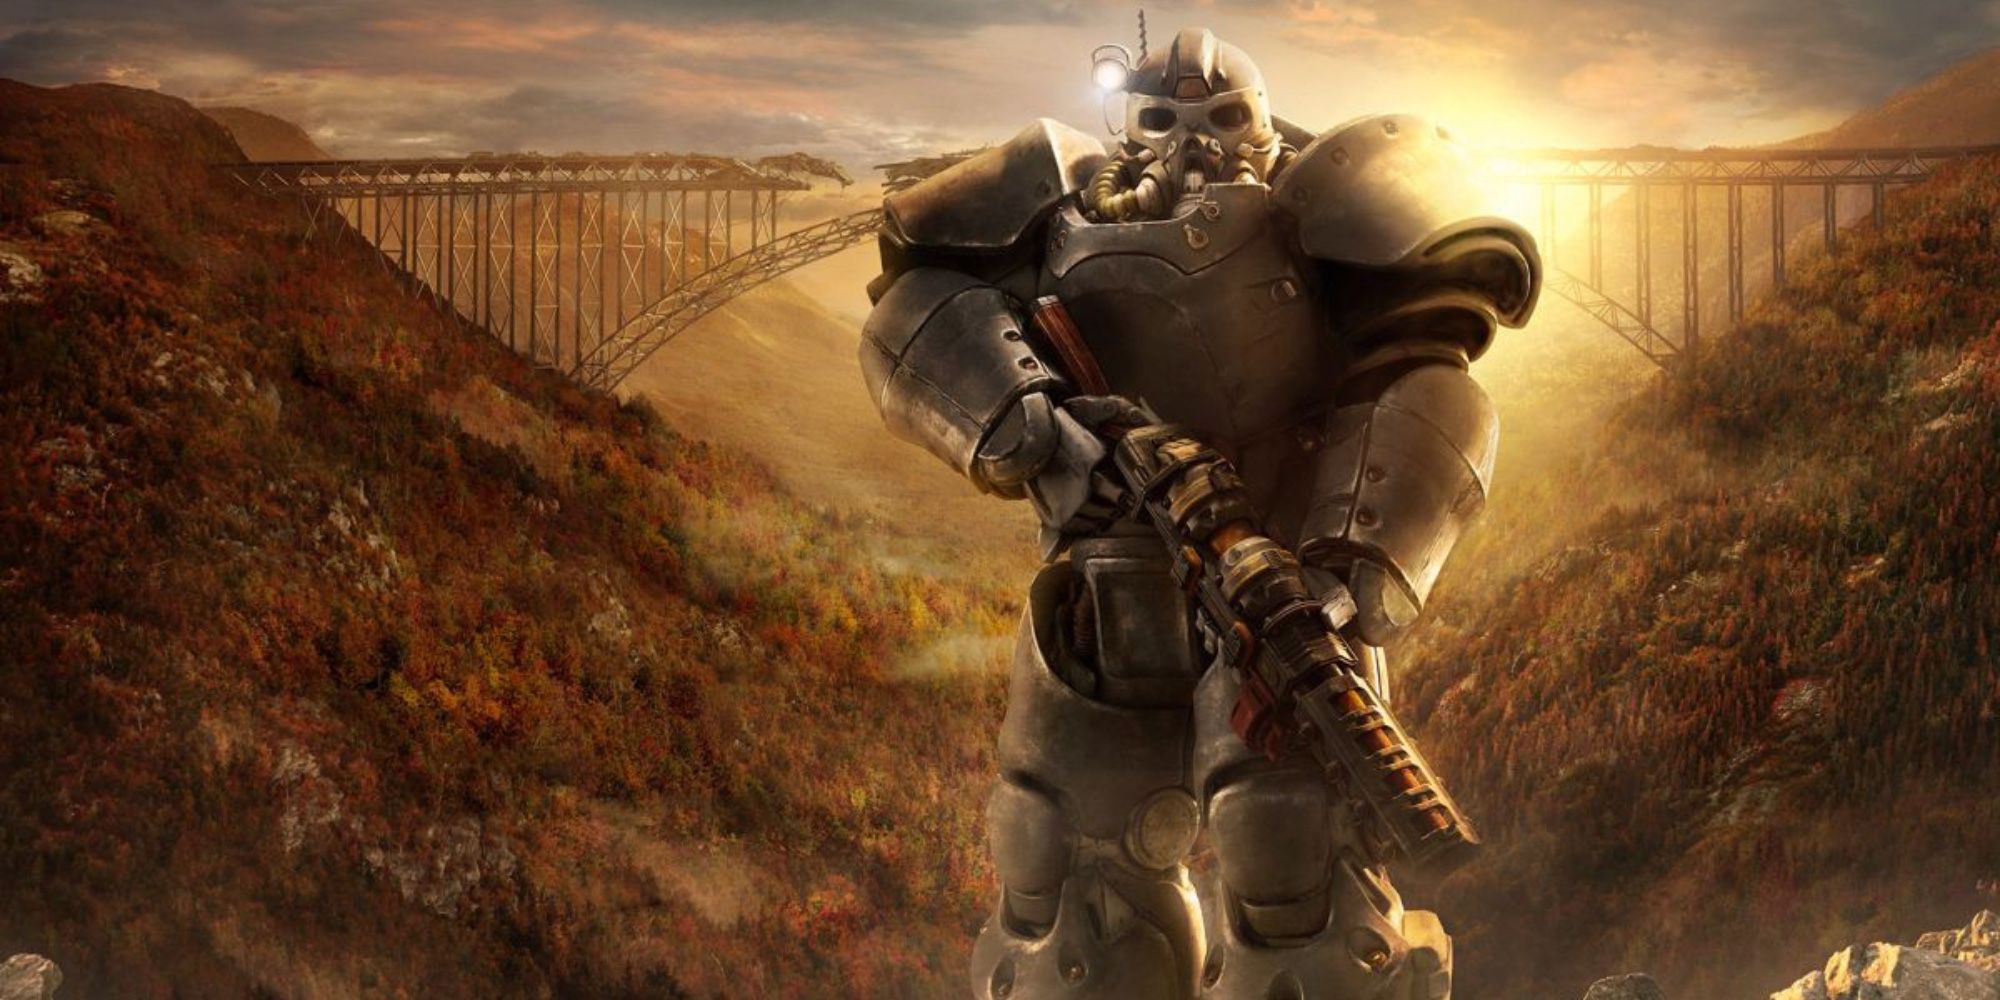 Why Some Fans Don’t Consider Fallout 76 To Be Canon